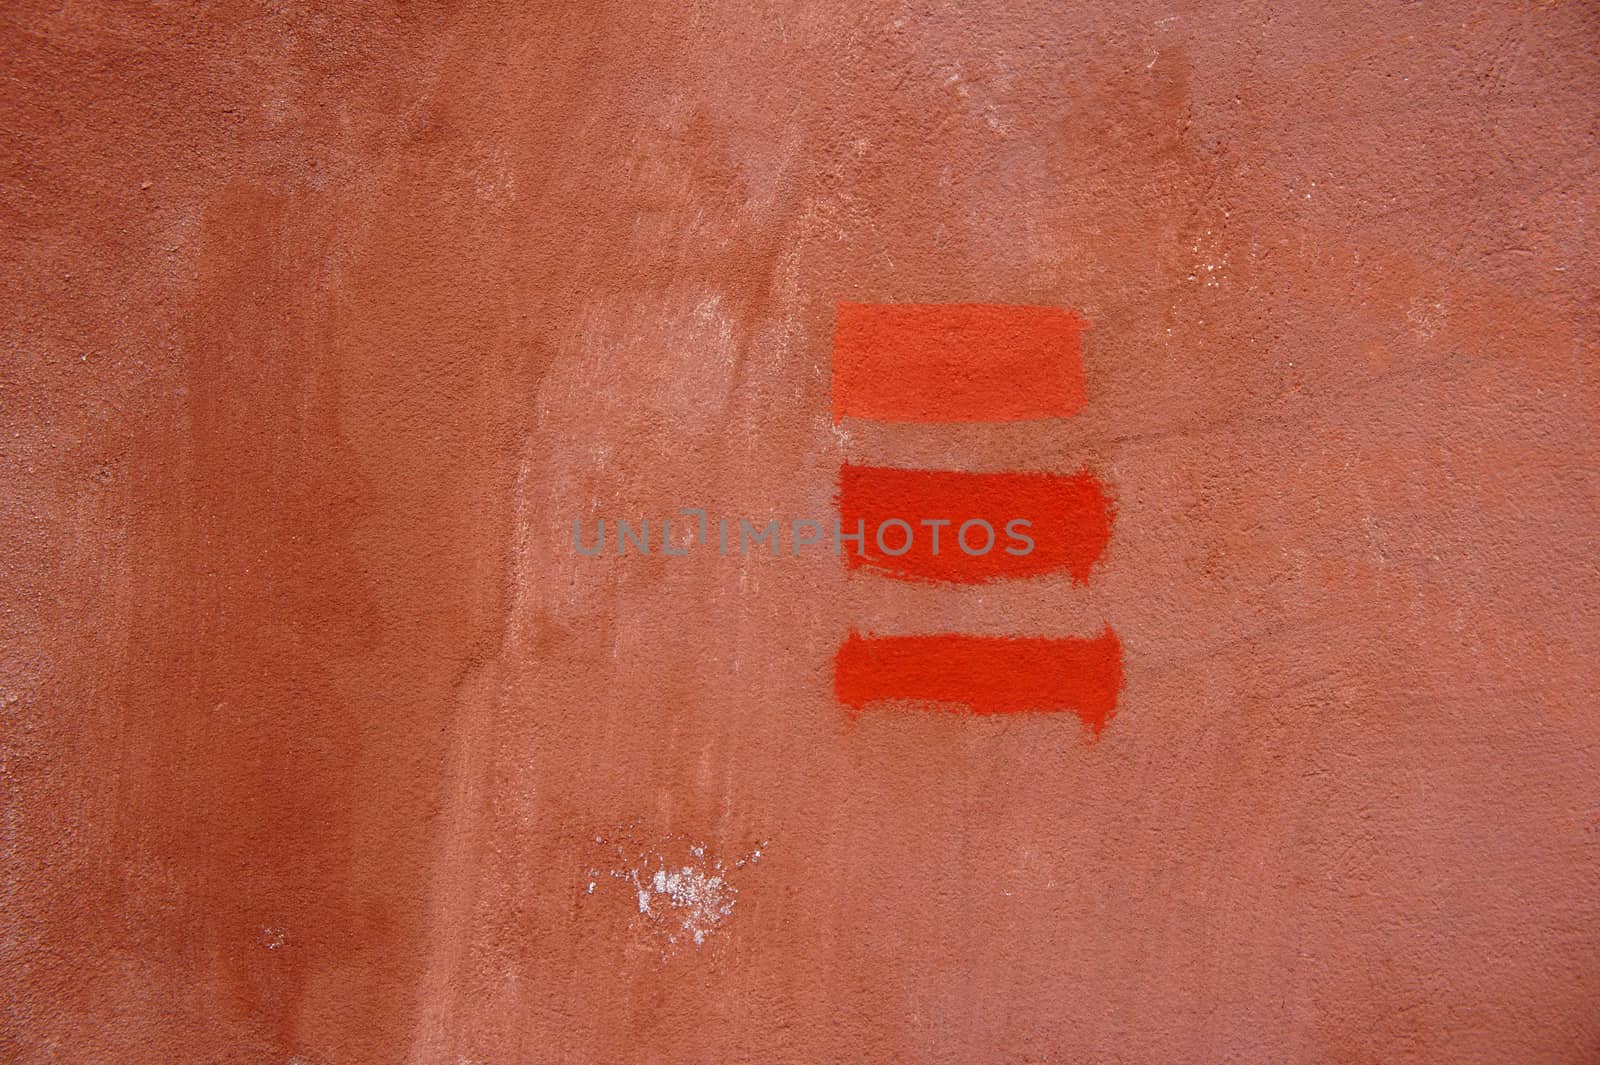 Three lines of red brick colour, painted on concrete wall